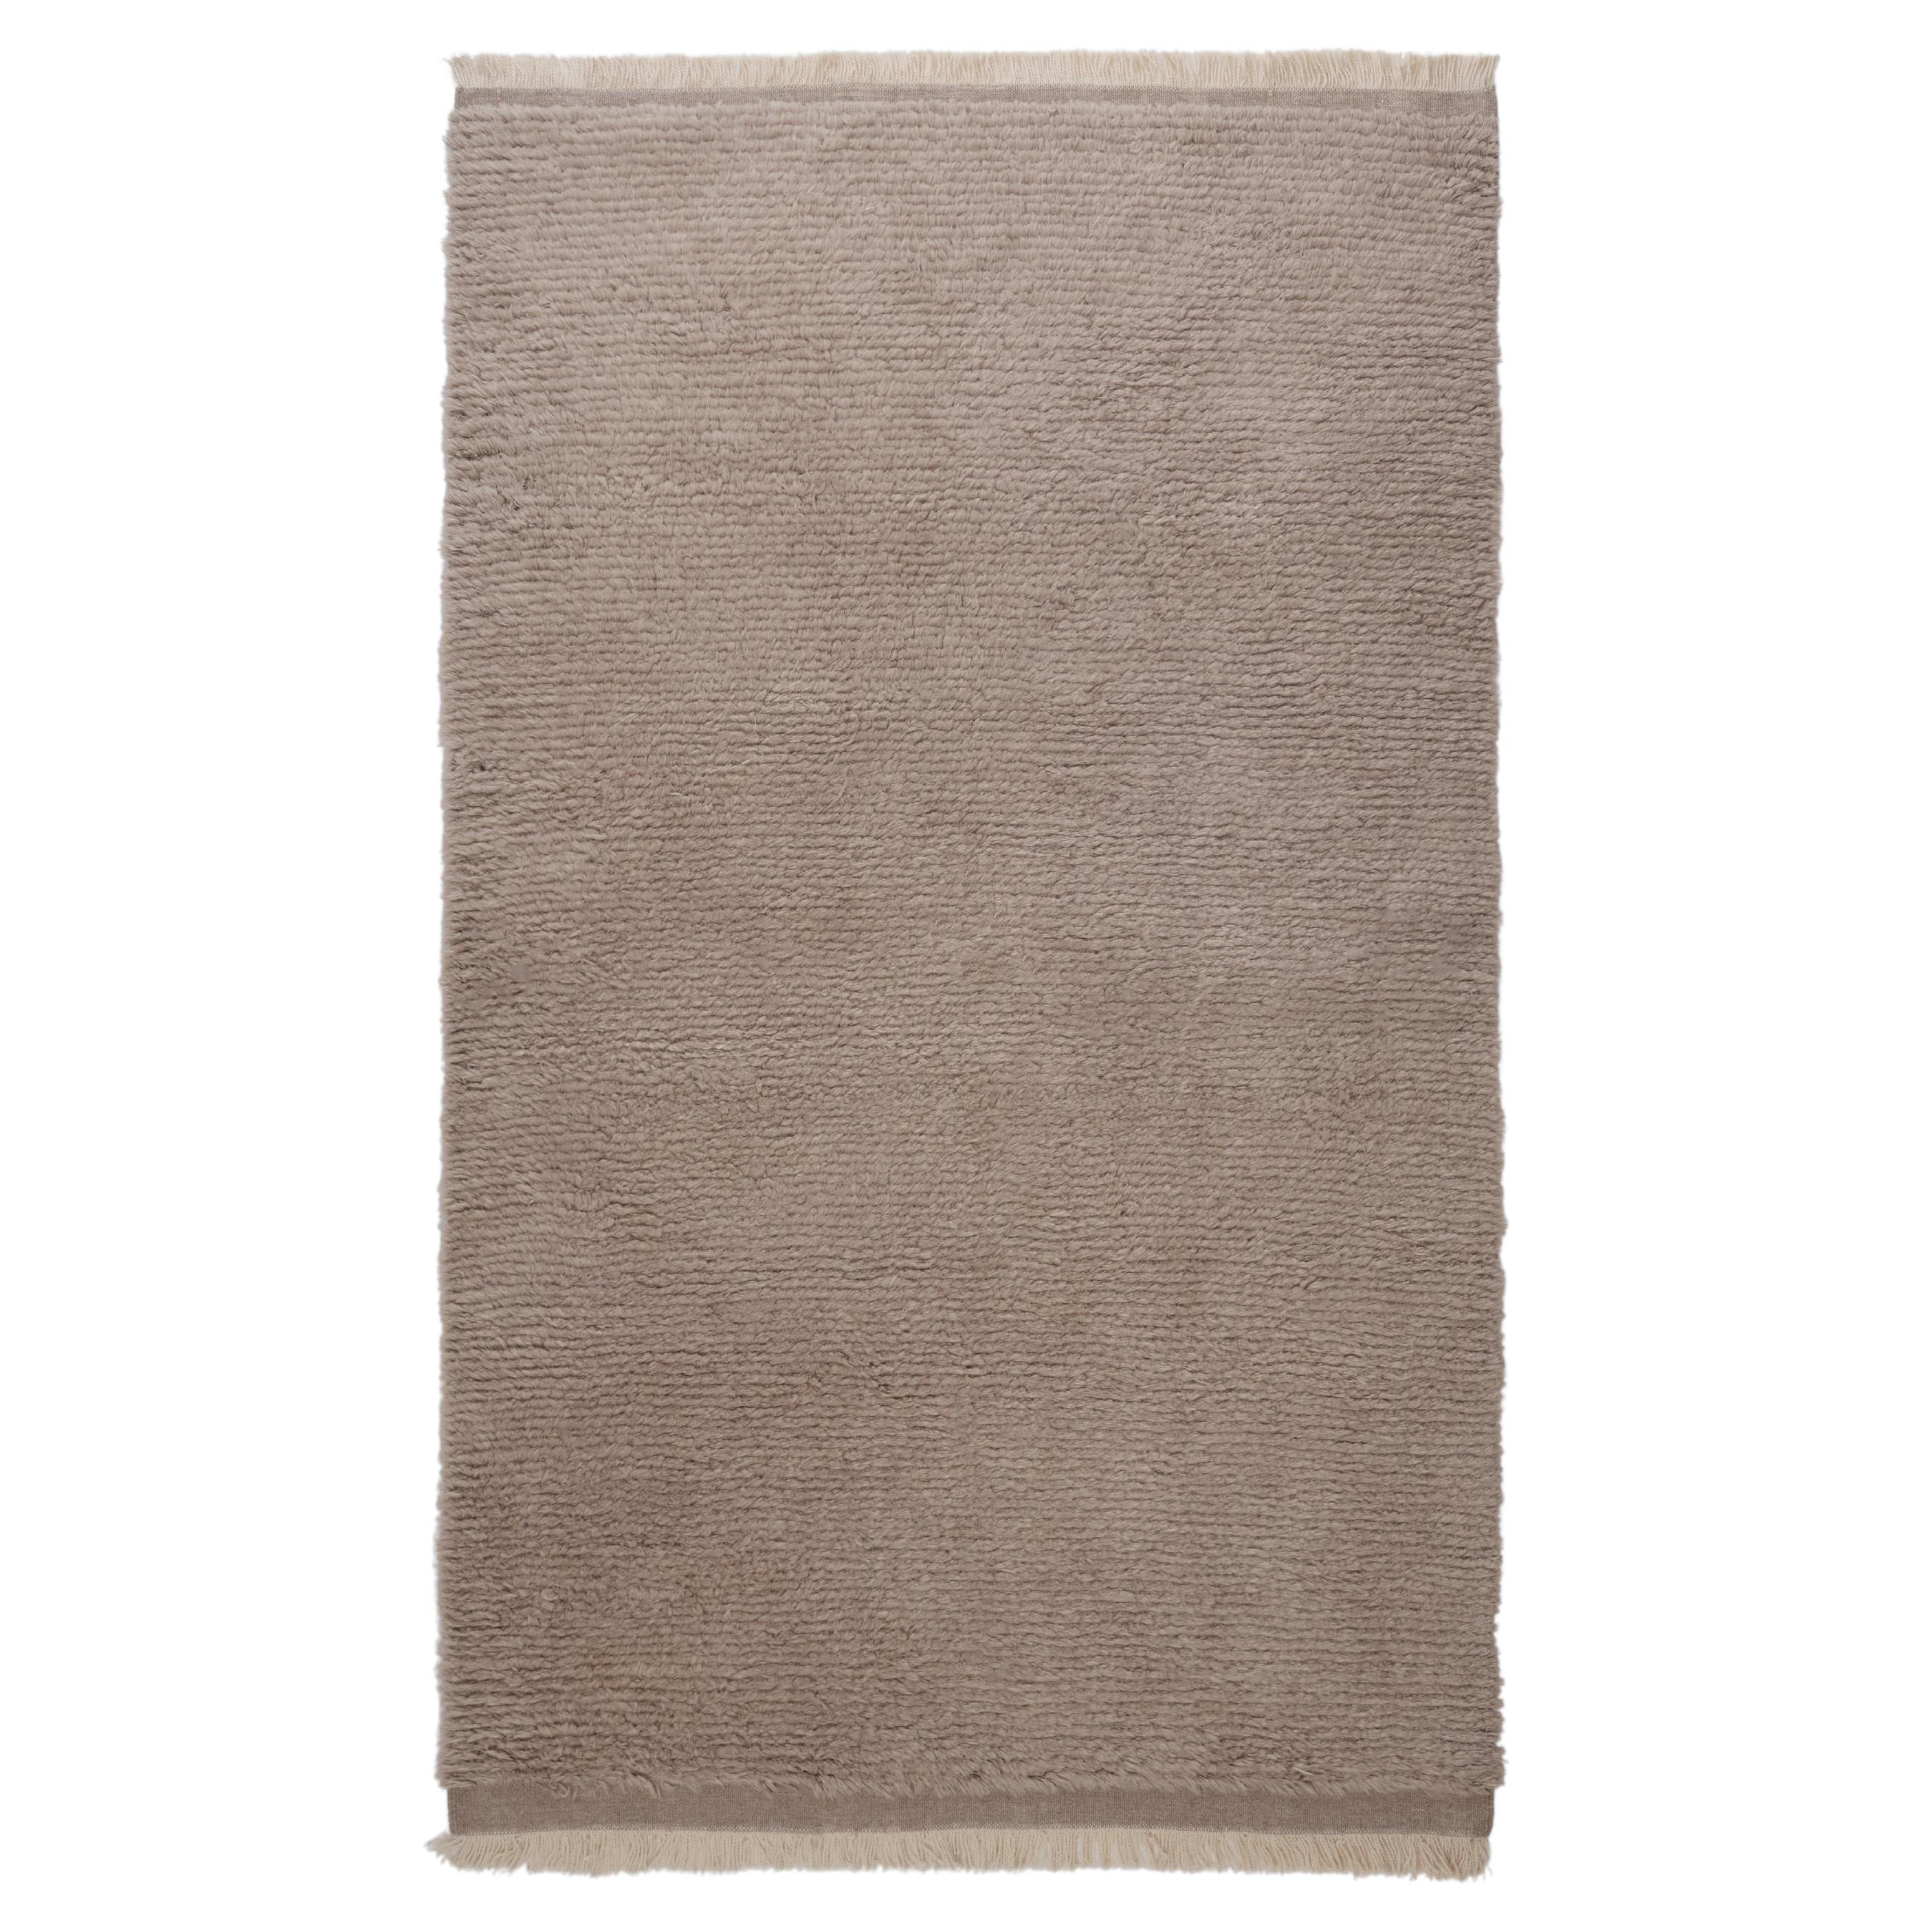 The Forsyth Woolly Shag Rug - Short Pile, Taupe, 9x12